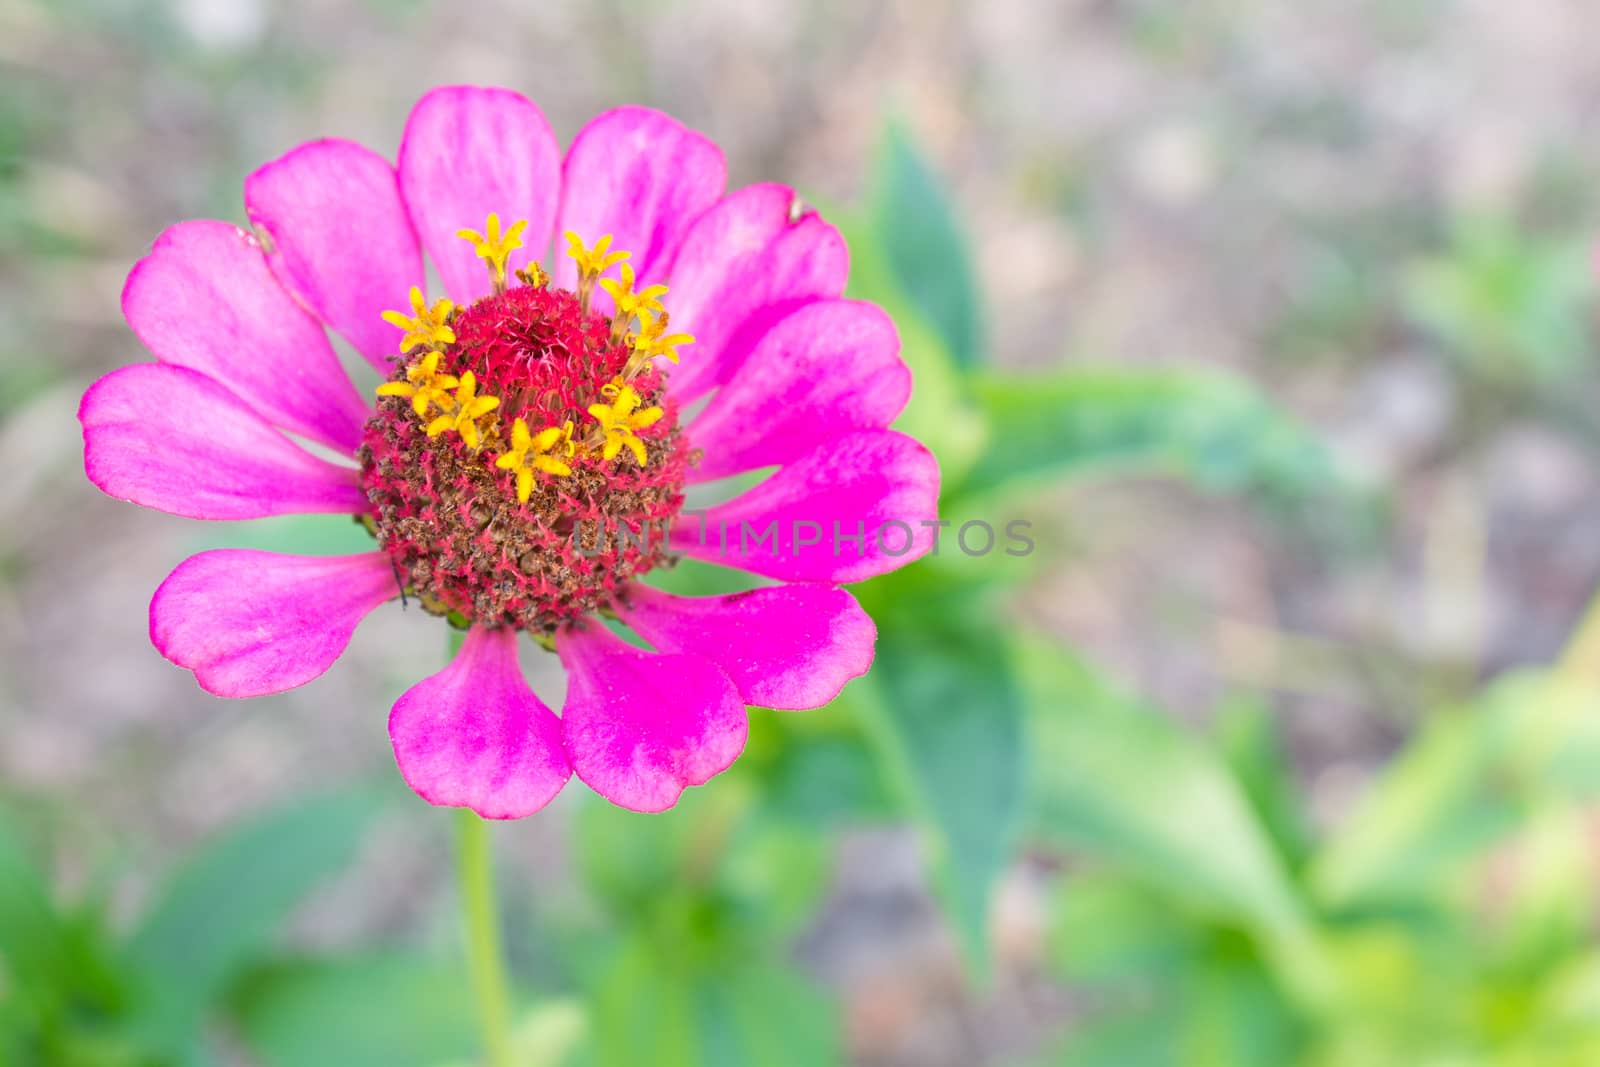 Pink zinnia blossom at top left closeup. Zinnia bloom in garden on green leaf background.